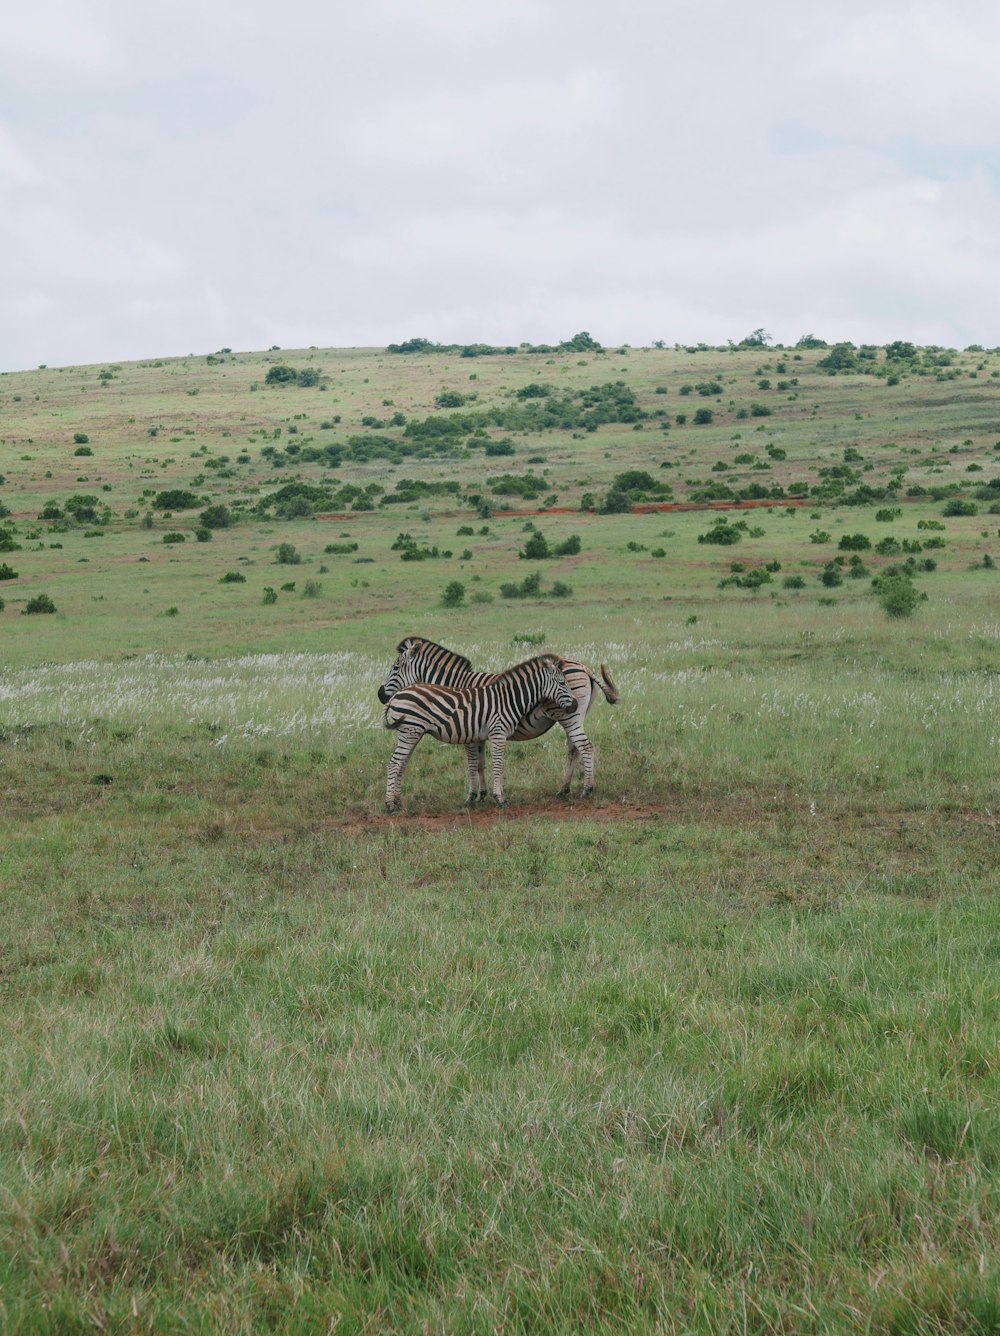 two zebras are standing in a grassy field